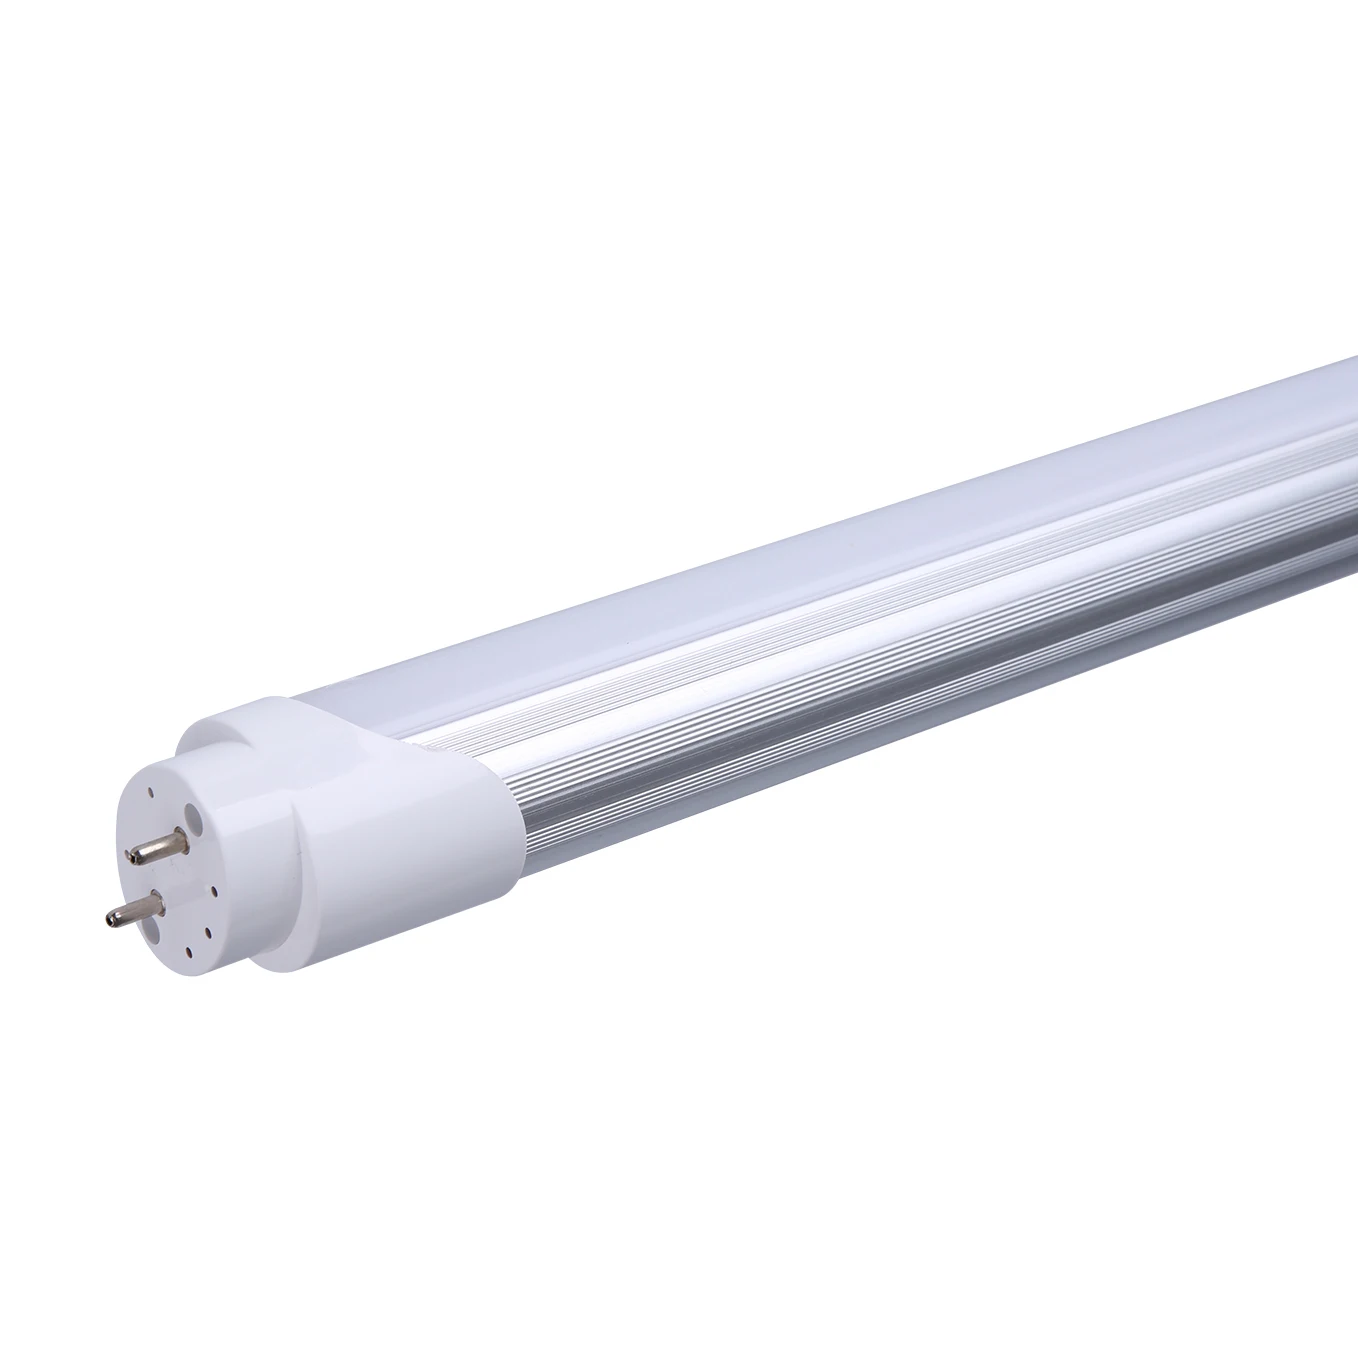 New Product 86-265V/ac inside Emergency Rechargeable Battery Powered Backup T8 9W 18W alu and pc LED Tube Light Lamp